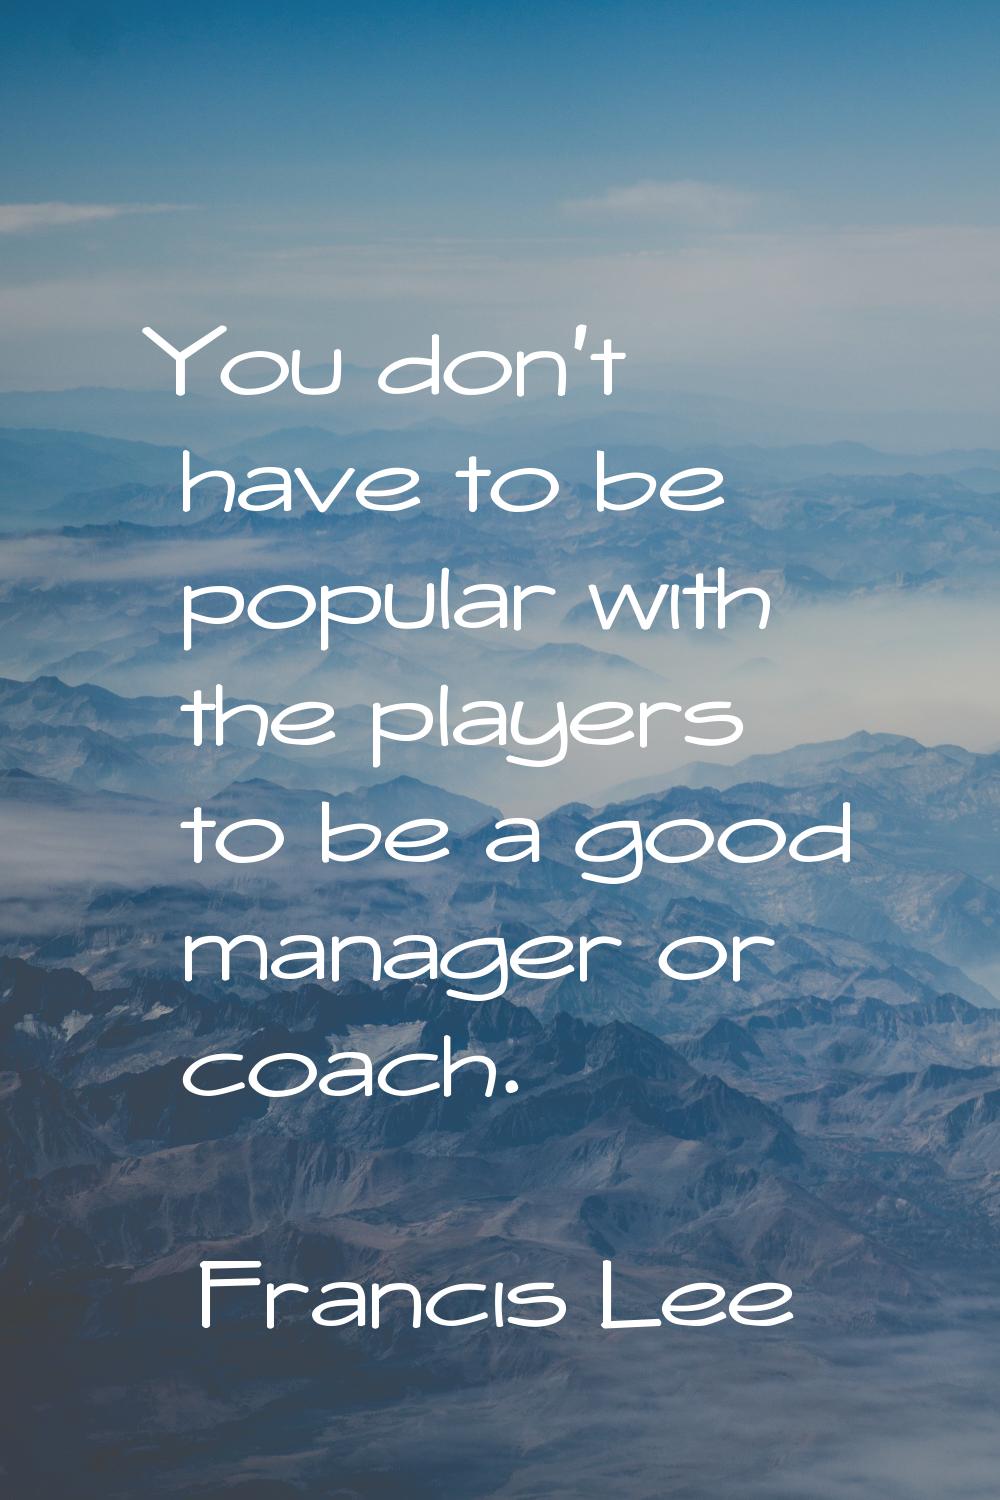 You don't have to be popular with the players to be a good manager or coach.